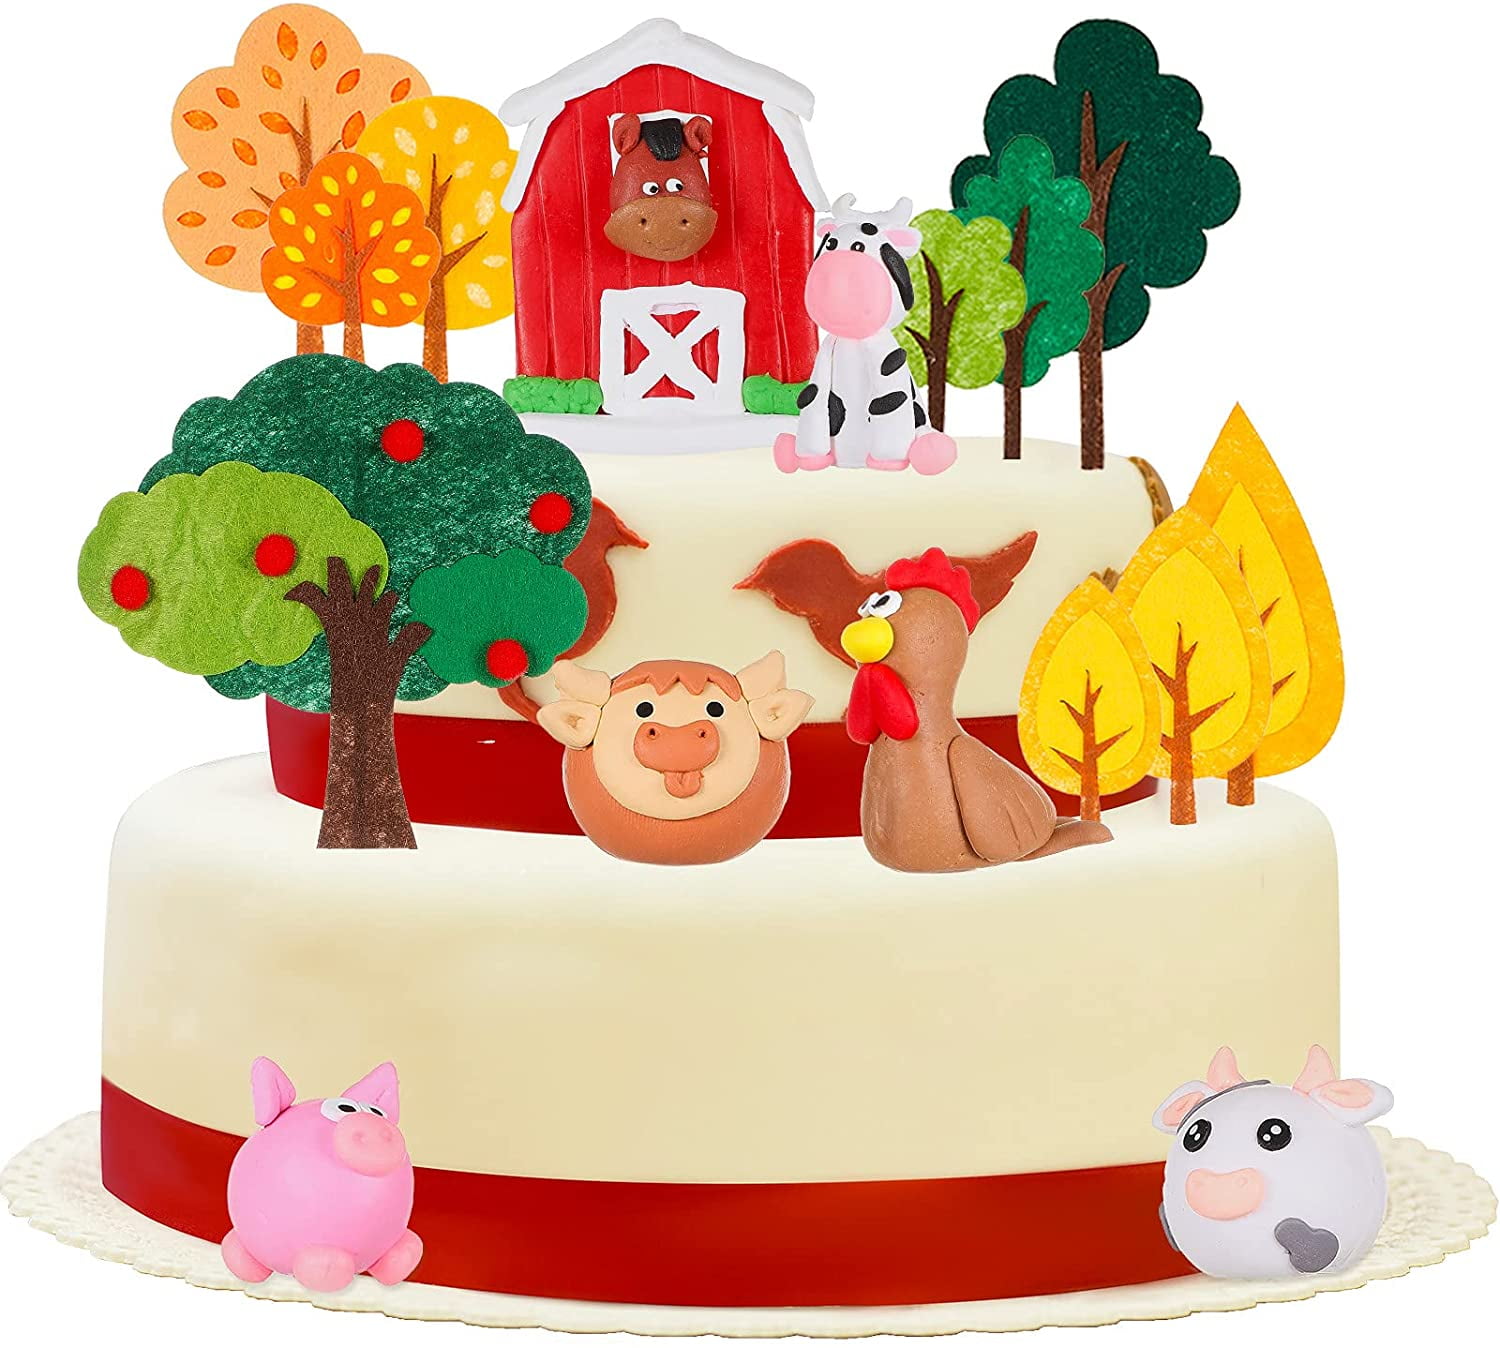 Coolest Chicken Cakes and Lots of Birthday Cake Ideas for Children